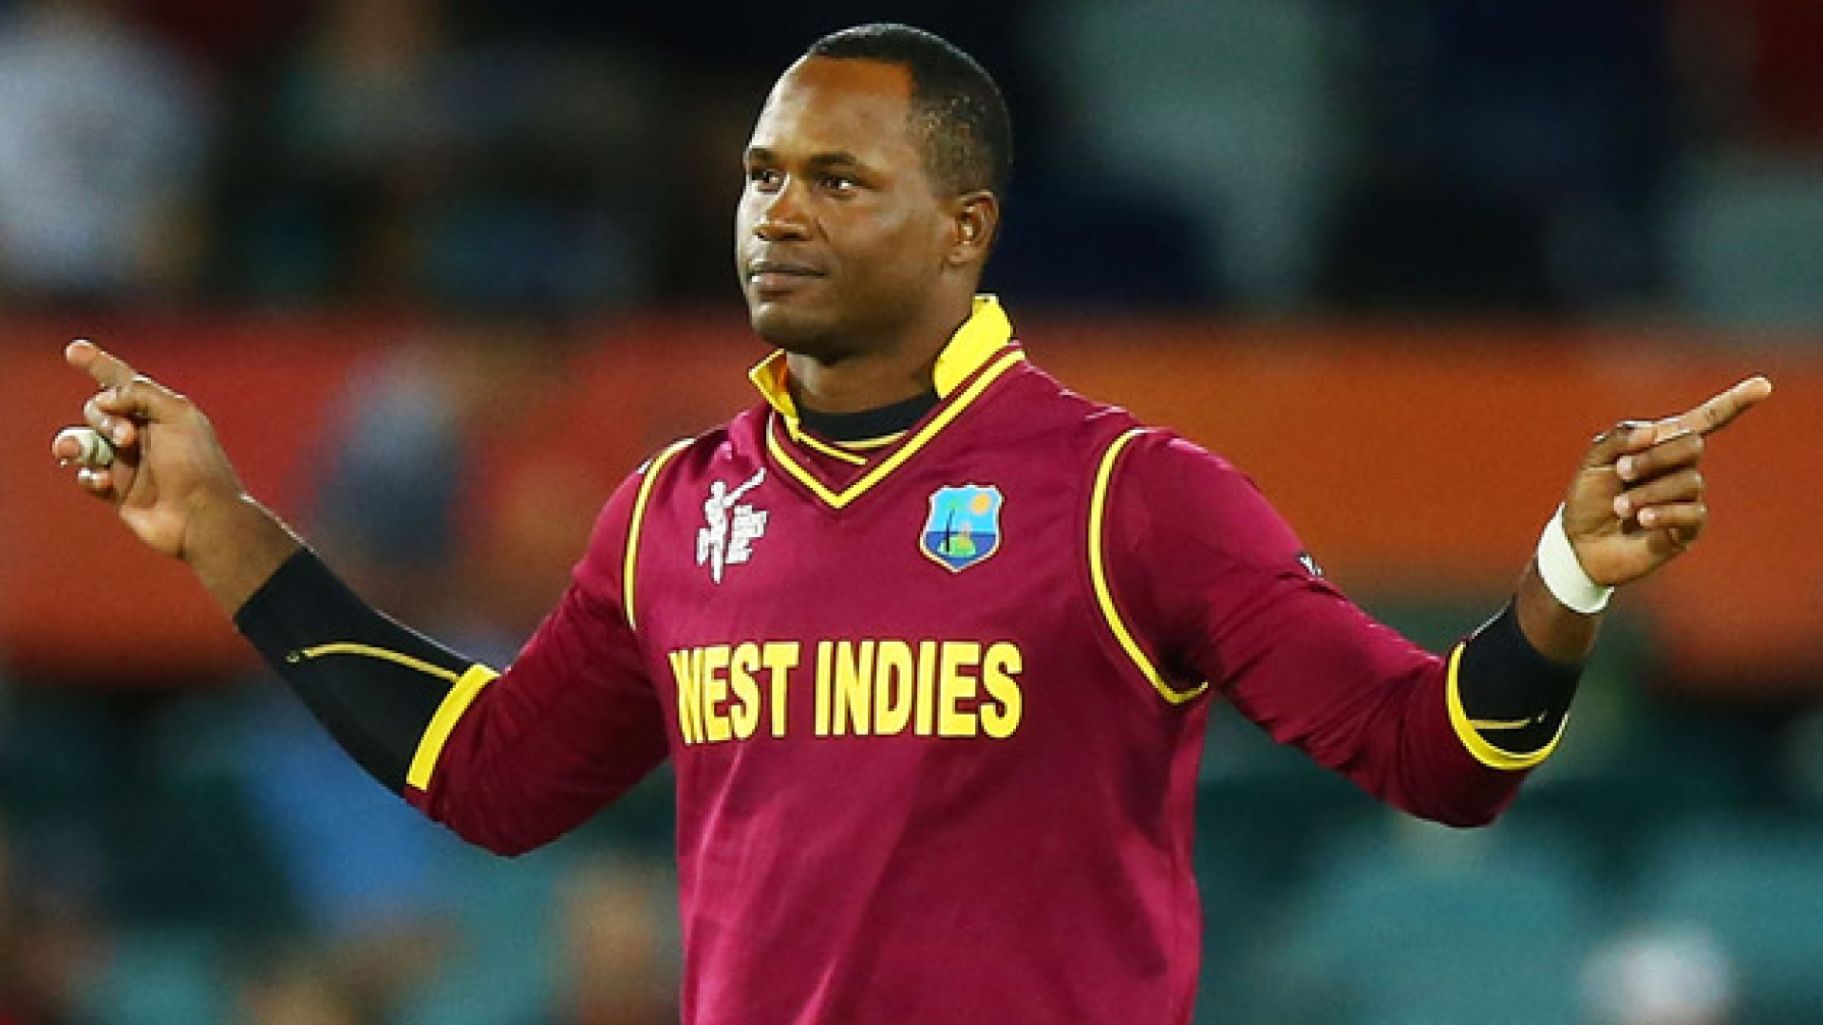 Former West Indies’ batter Marlon Samuels charged with breaching ICC's anti-corruption codes